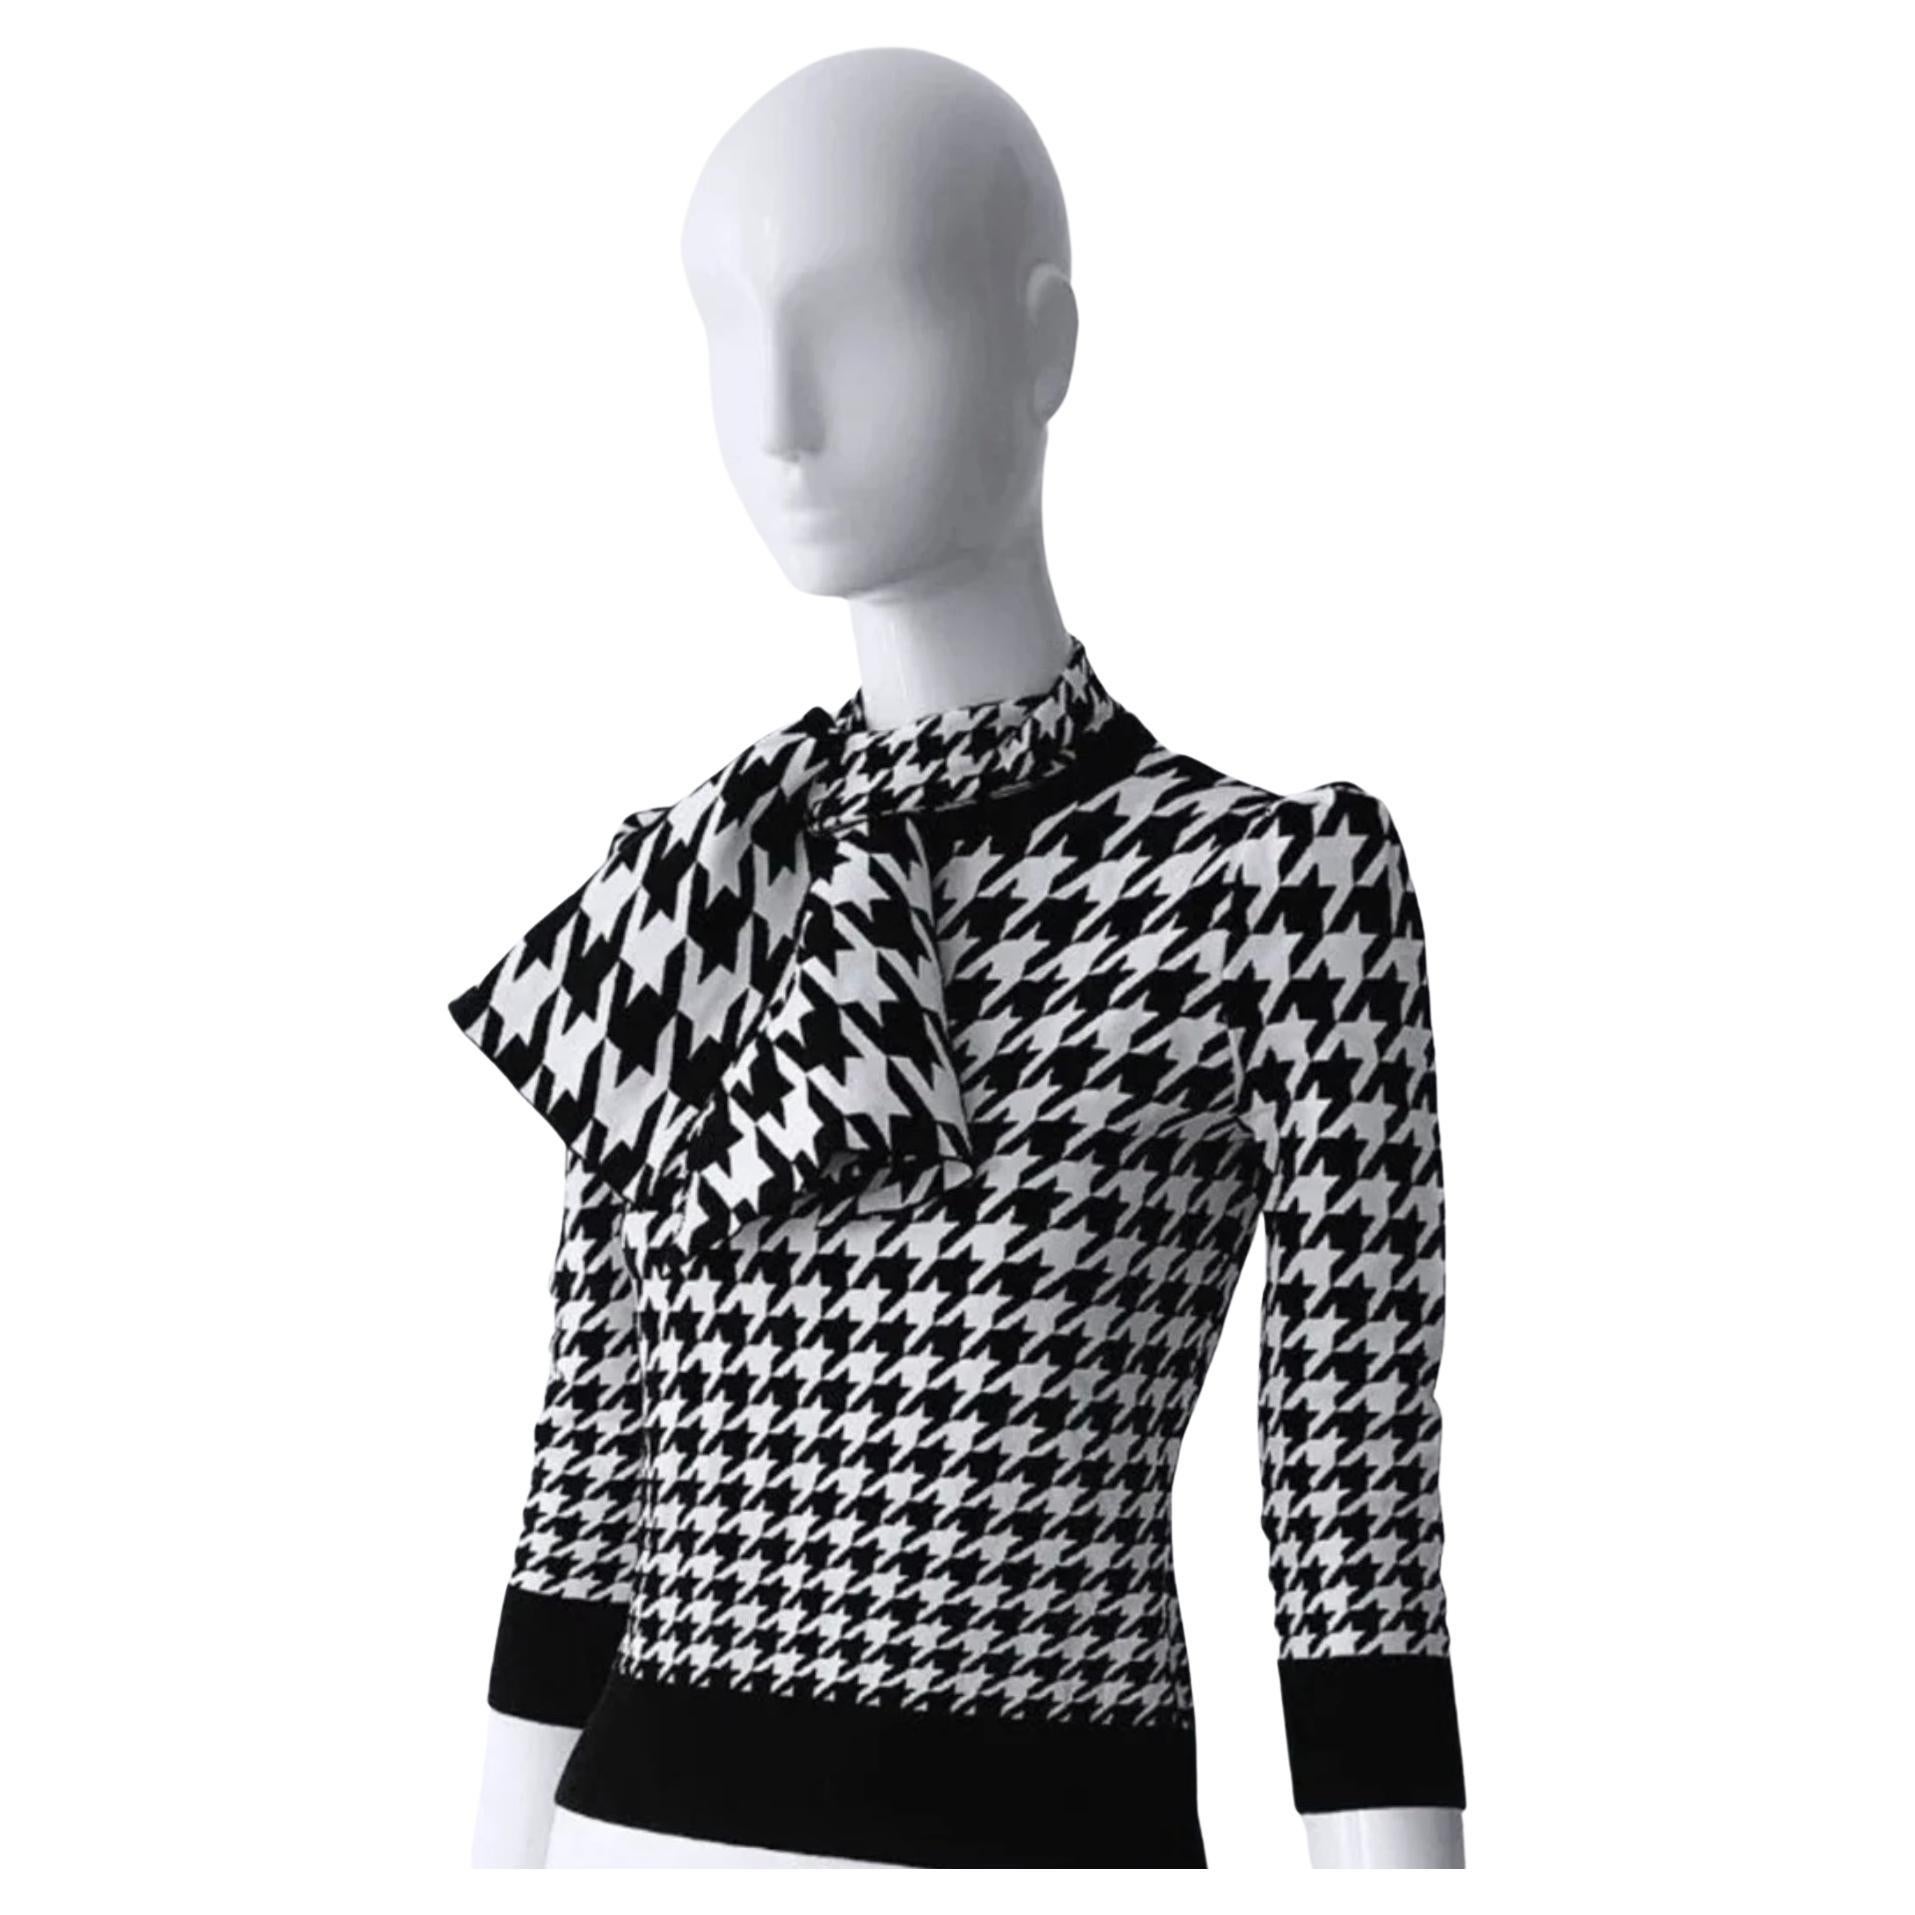 Alexander McQueen Houndstooth Bow Jumper Wool Dogtooth Sweater  Blouse Top